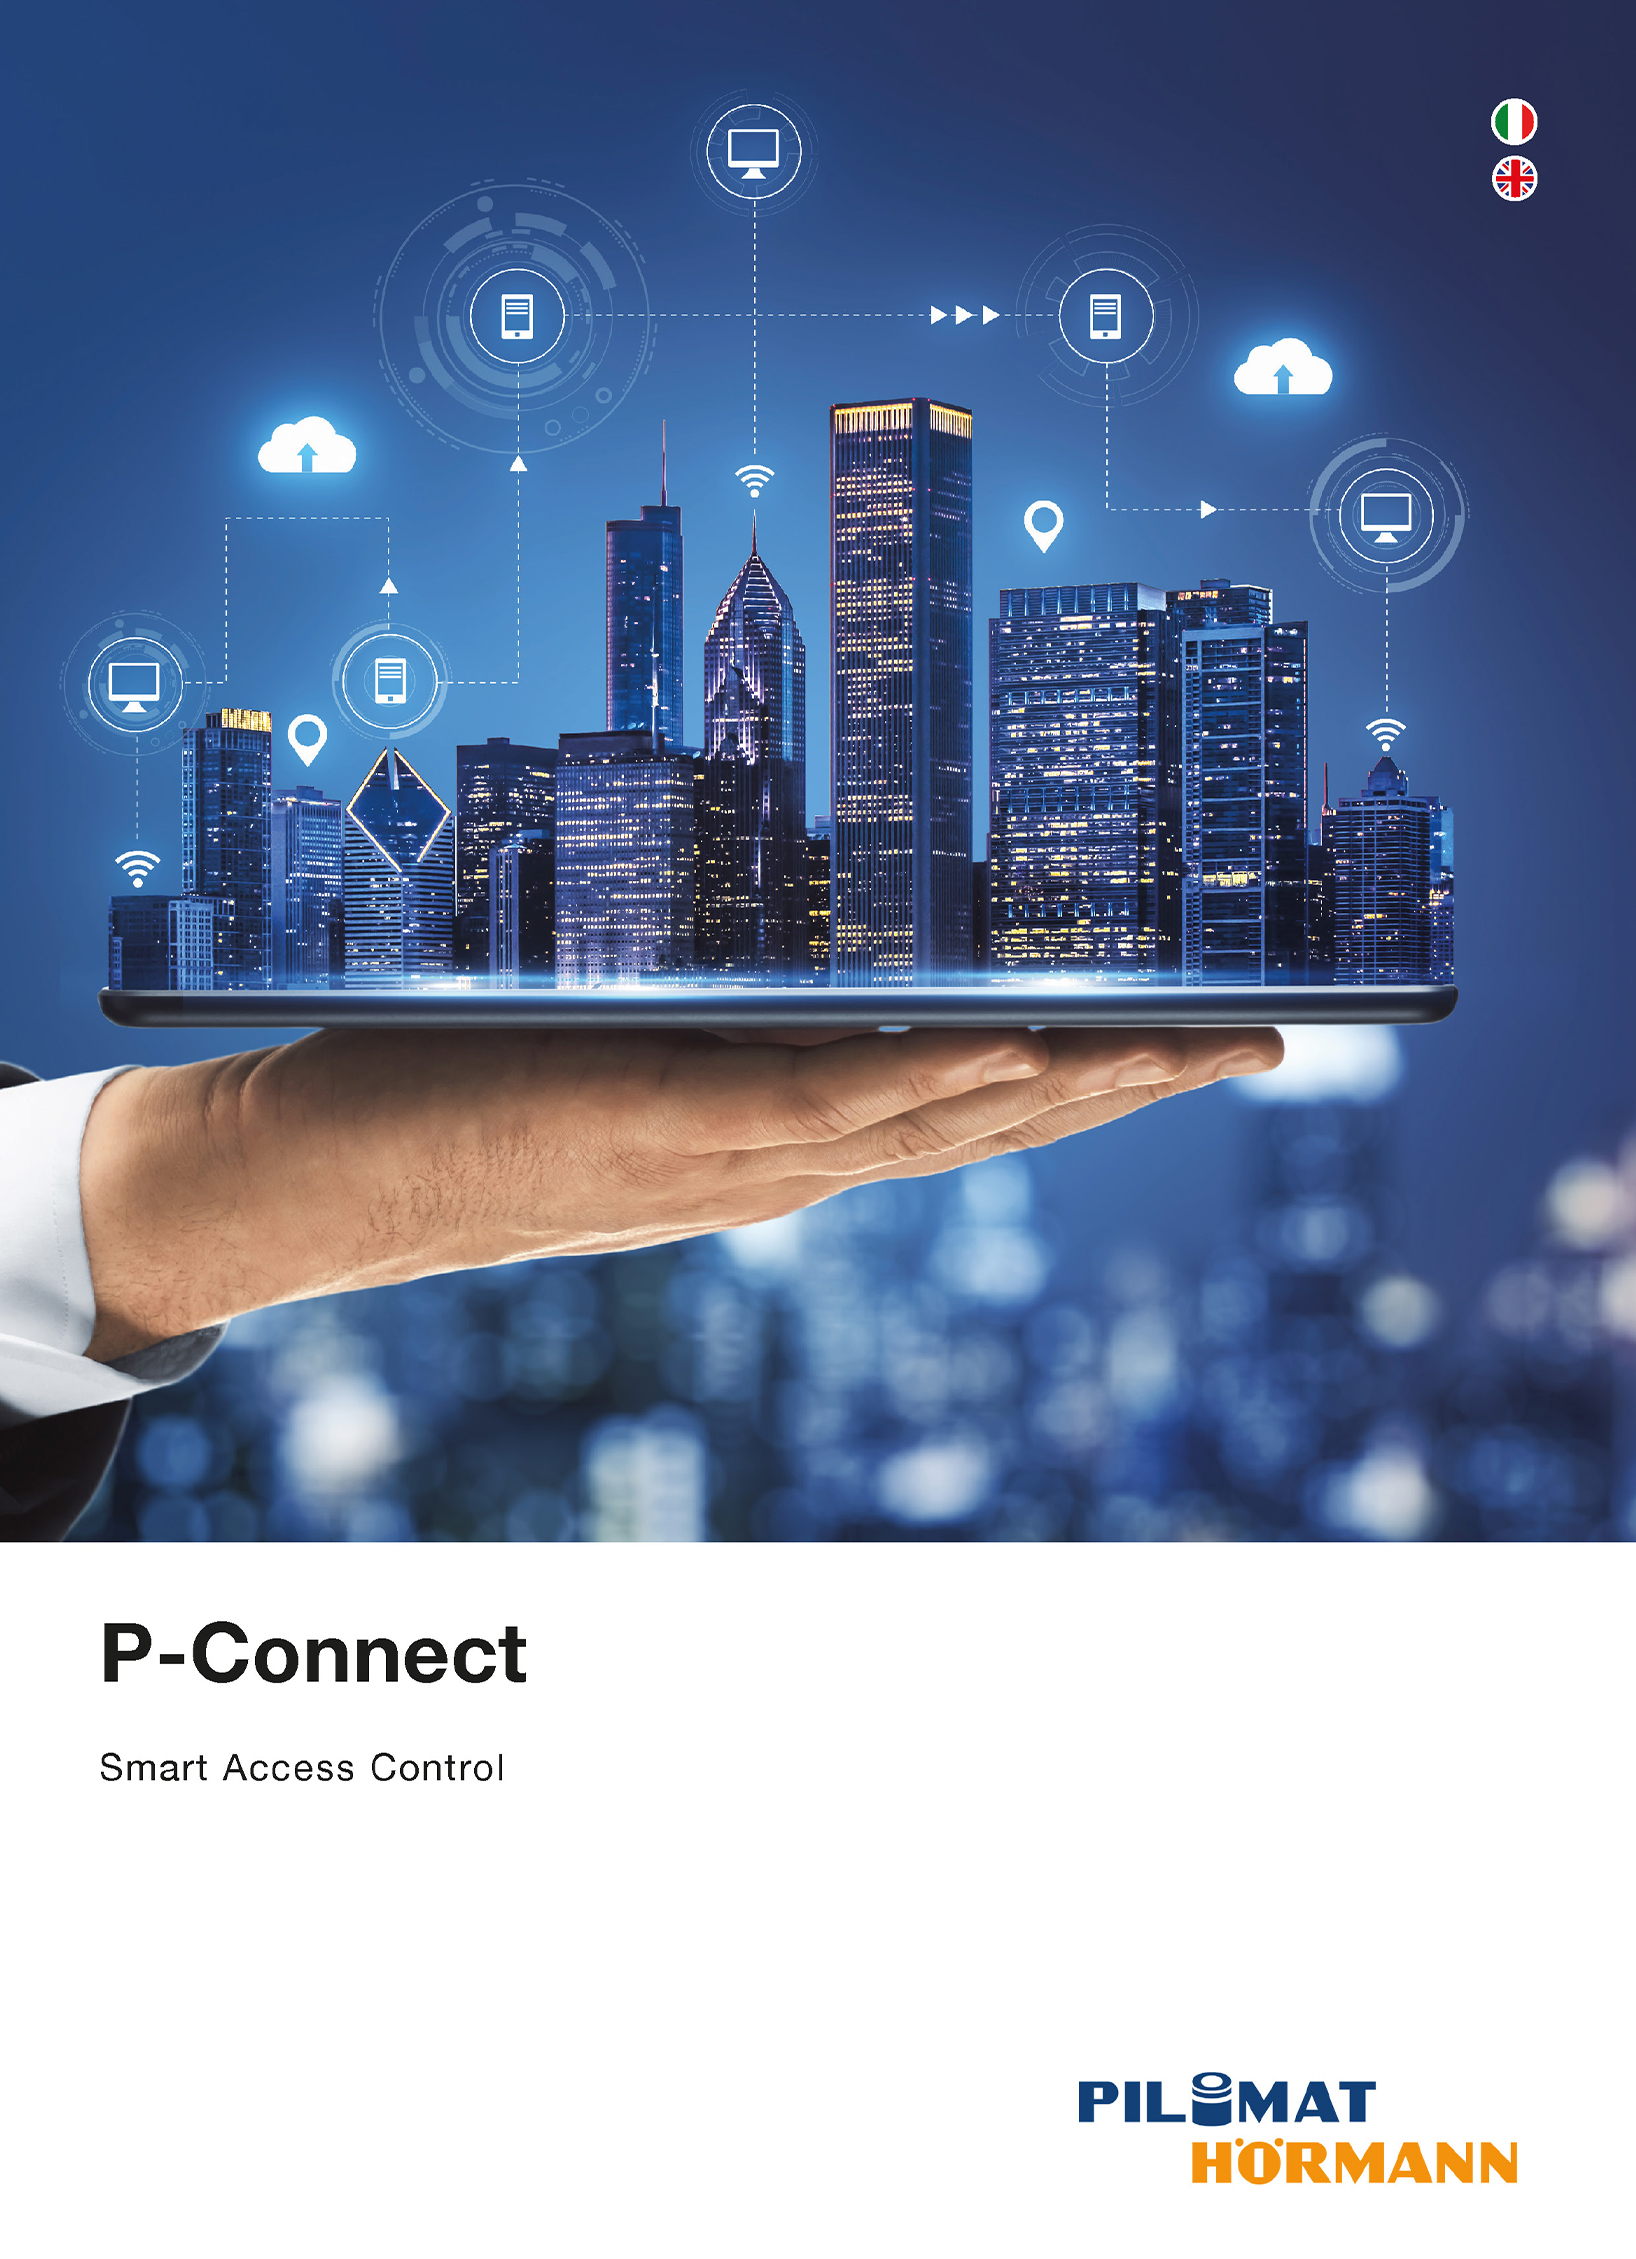 Cover page of the P-Connect brochure, an access control system for lifting and lowering automatic bollards